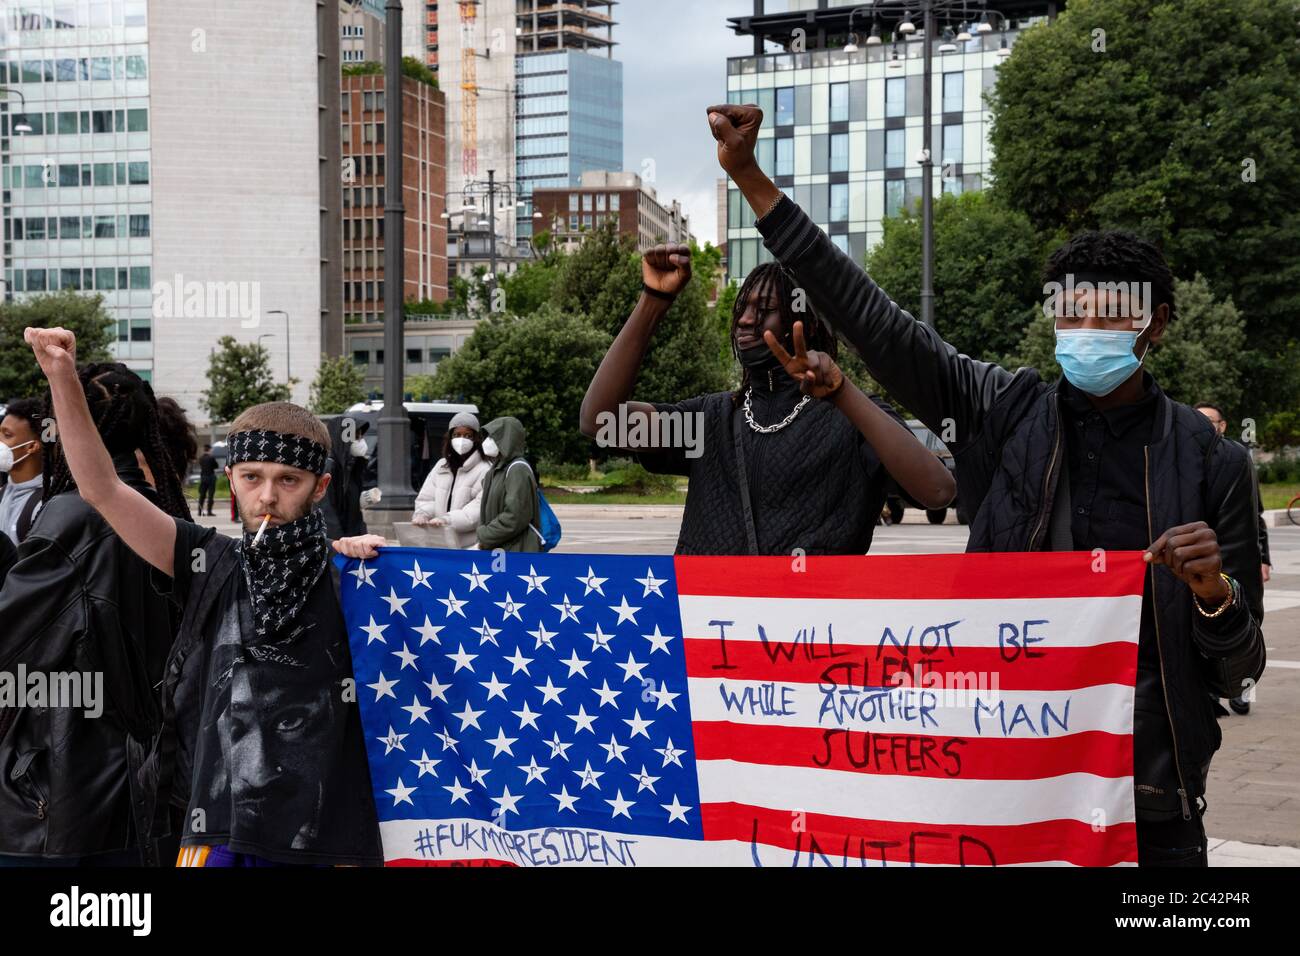 Protesters with American flag raising their fists during the protest assembly in solidarity to Black Lives Matter movement. Stock Photo